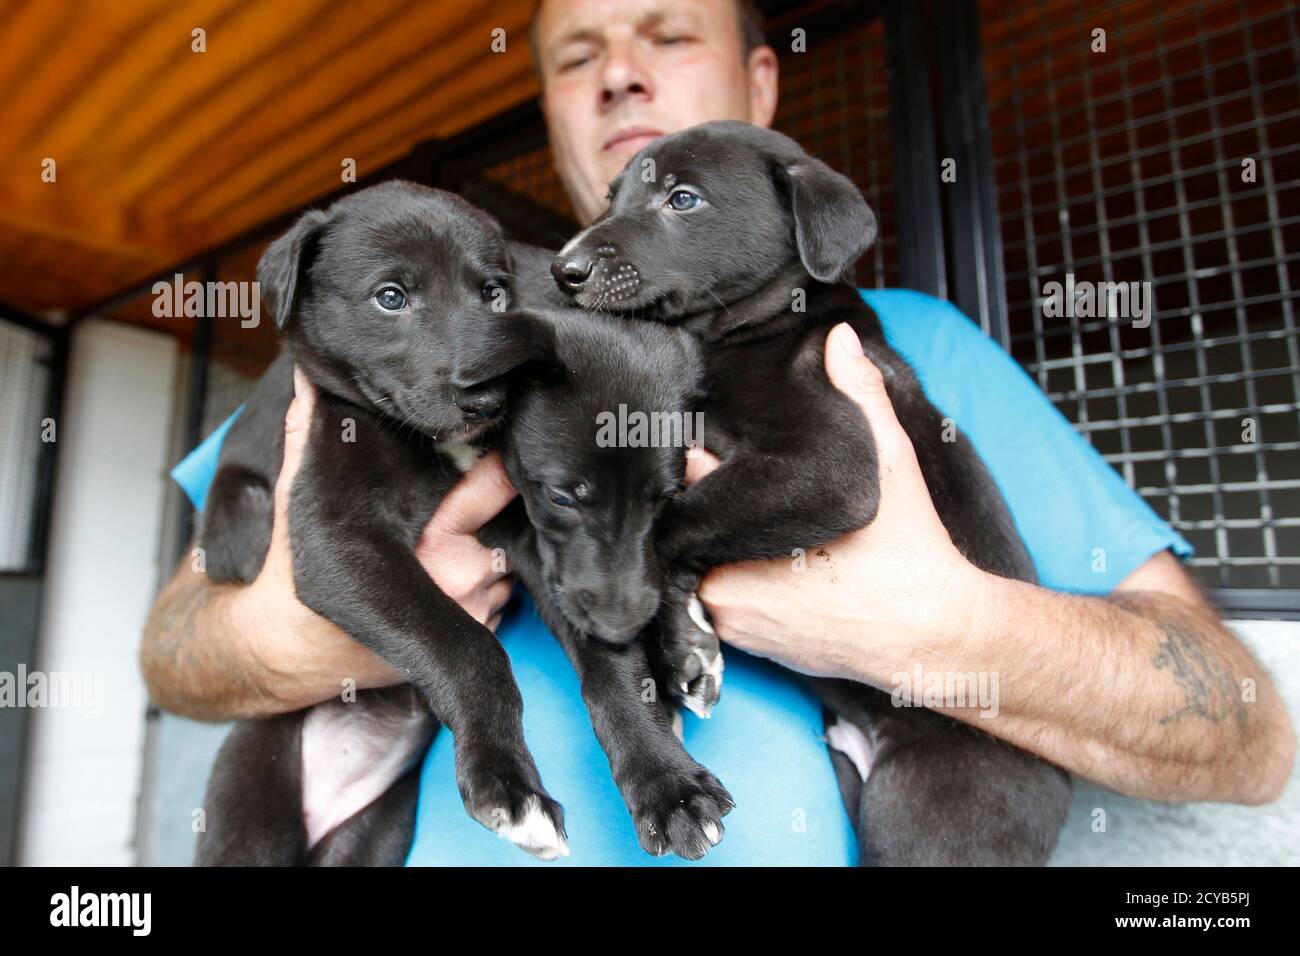 Greyhound breeder Kevin Gant holds part of a litter of four week old  puppies in Norfolk June 5, 2011. A greyhound typically begins its racing  career around the age of eighteen months